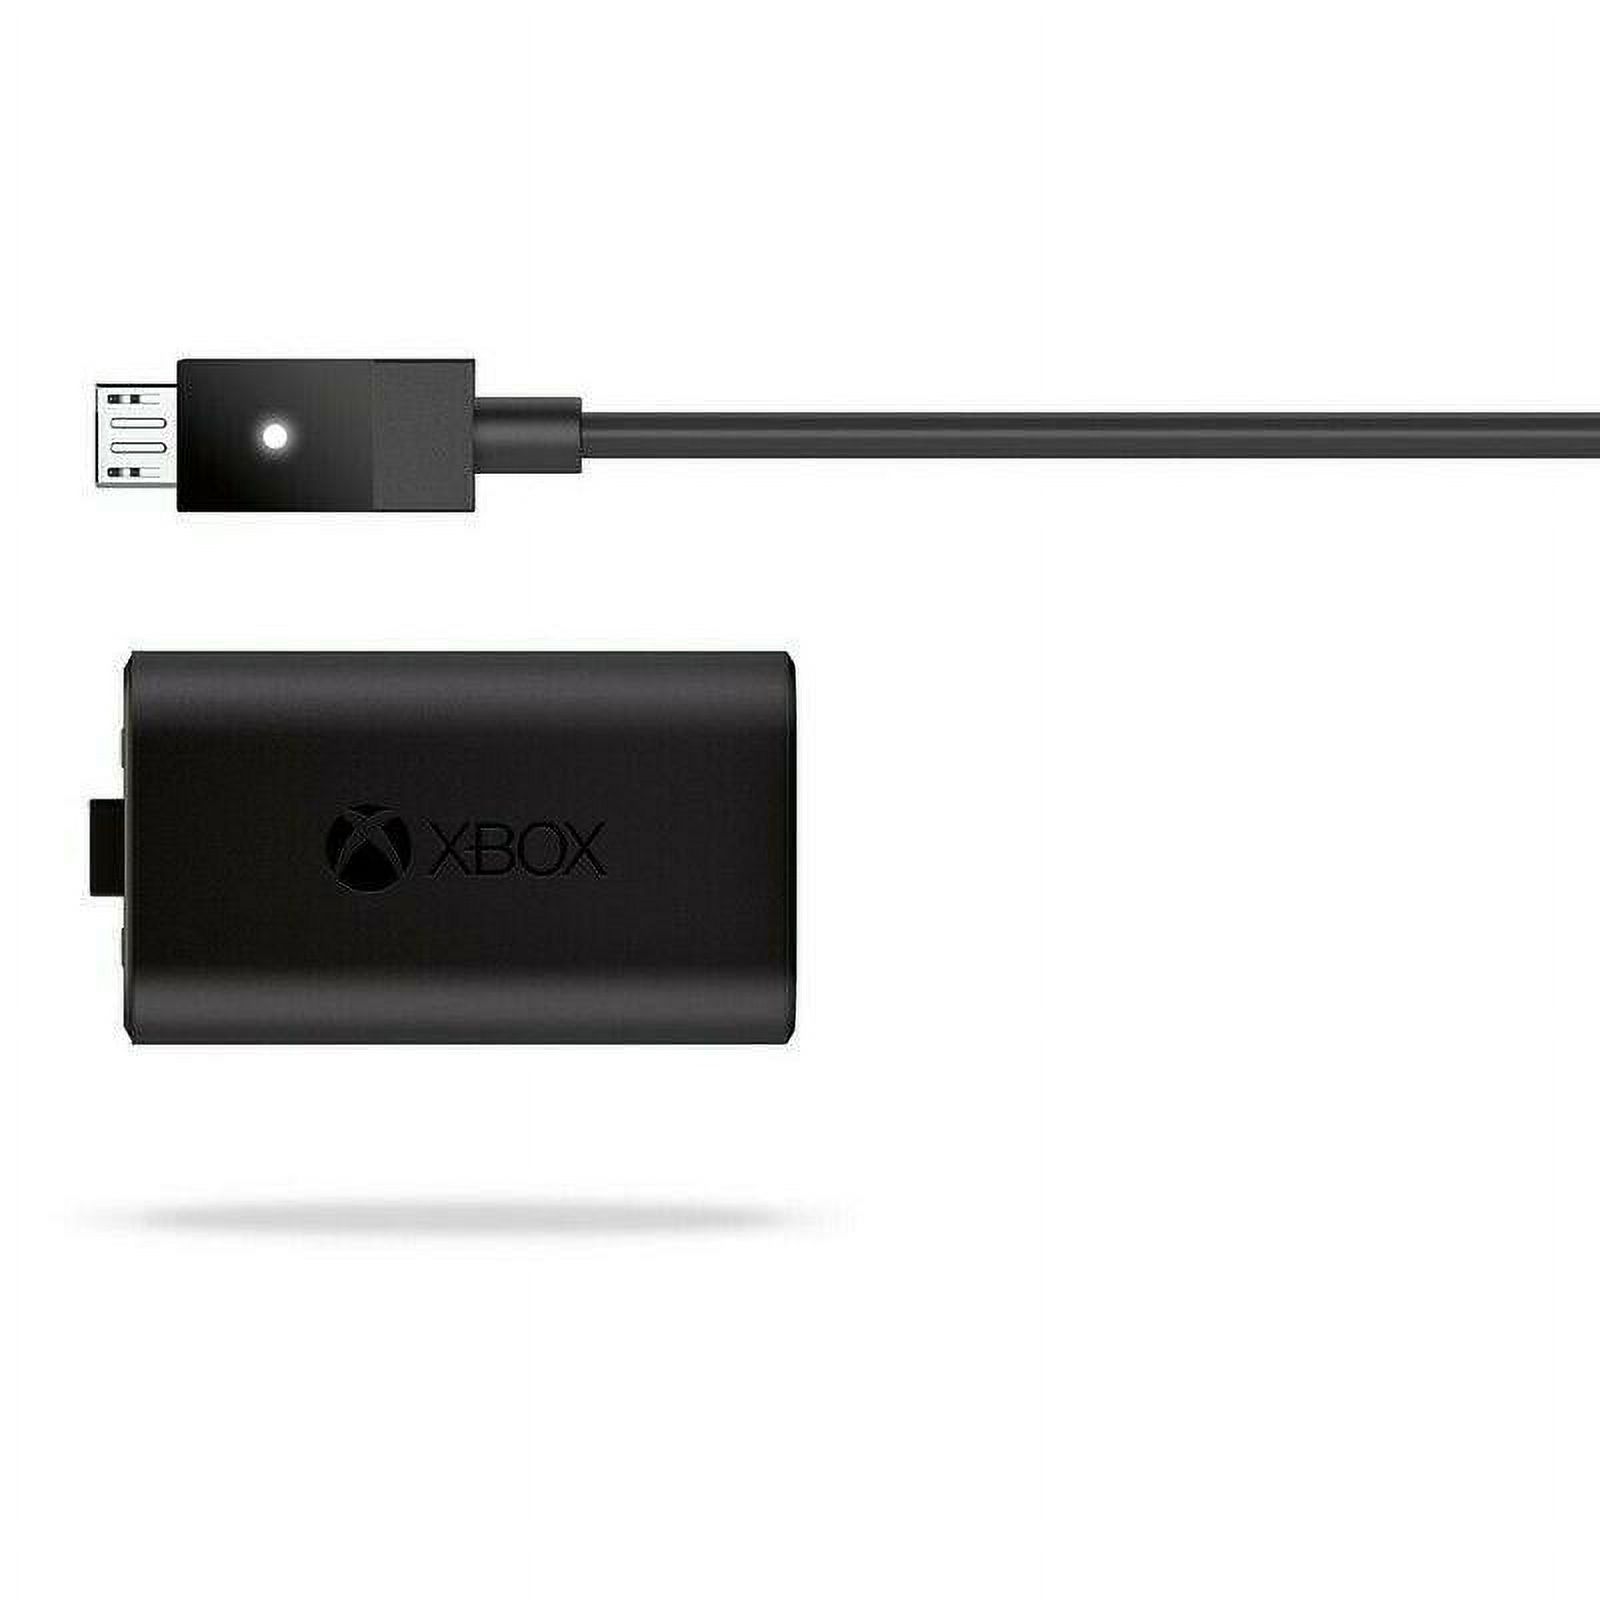 Genuine Microsoft Xbox One Play and Charge Kit S3V-00001 - Used - image 2 of 3